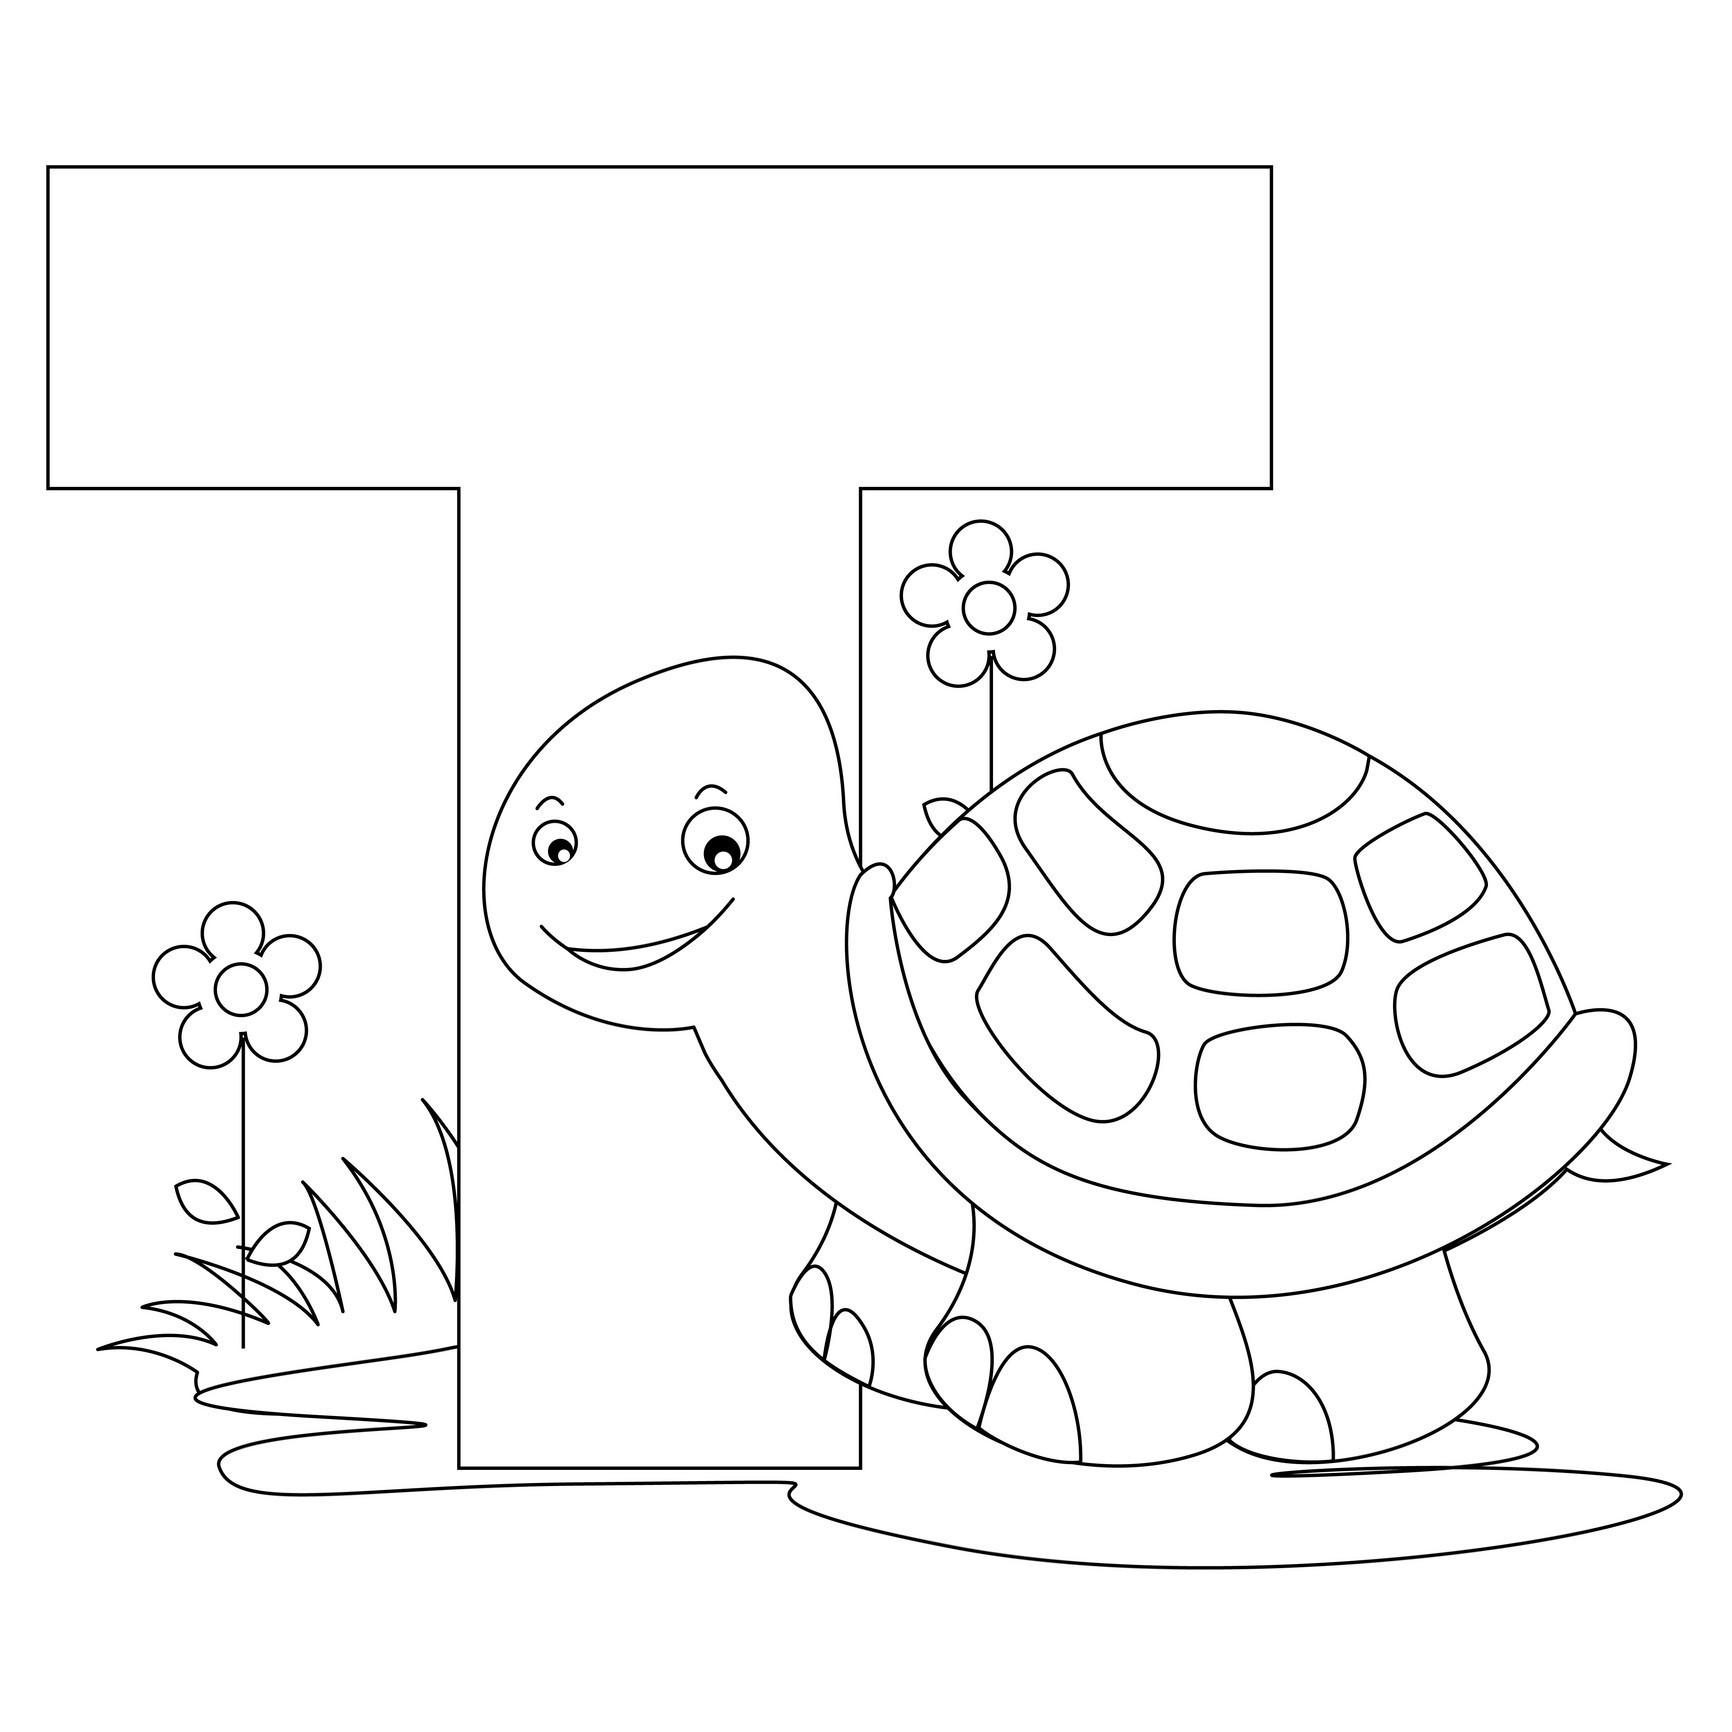 Alphabet Coloring Pages For Toddlers
 Free Printable Alphabet Coloring Pages for Kids Best